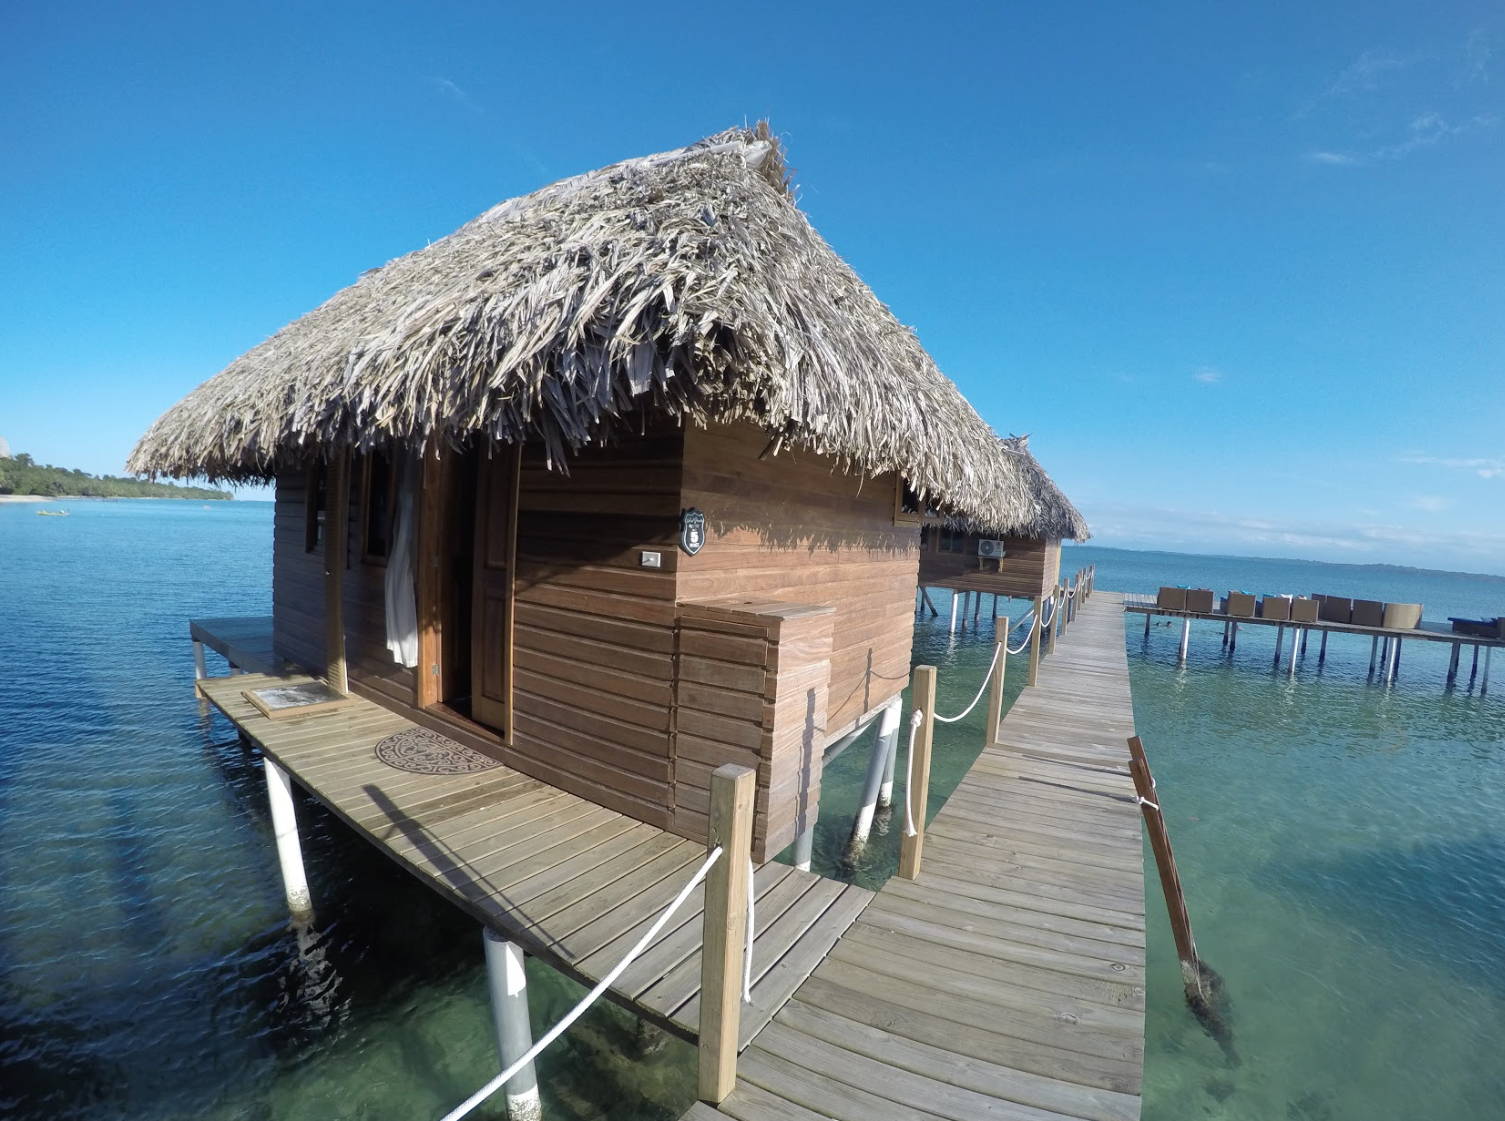 A floating hut with a straw roof in the sea in panama